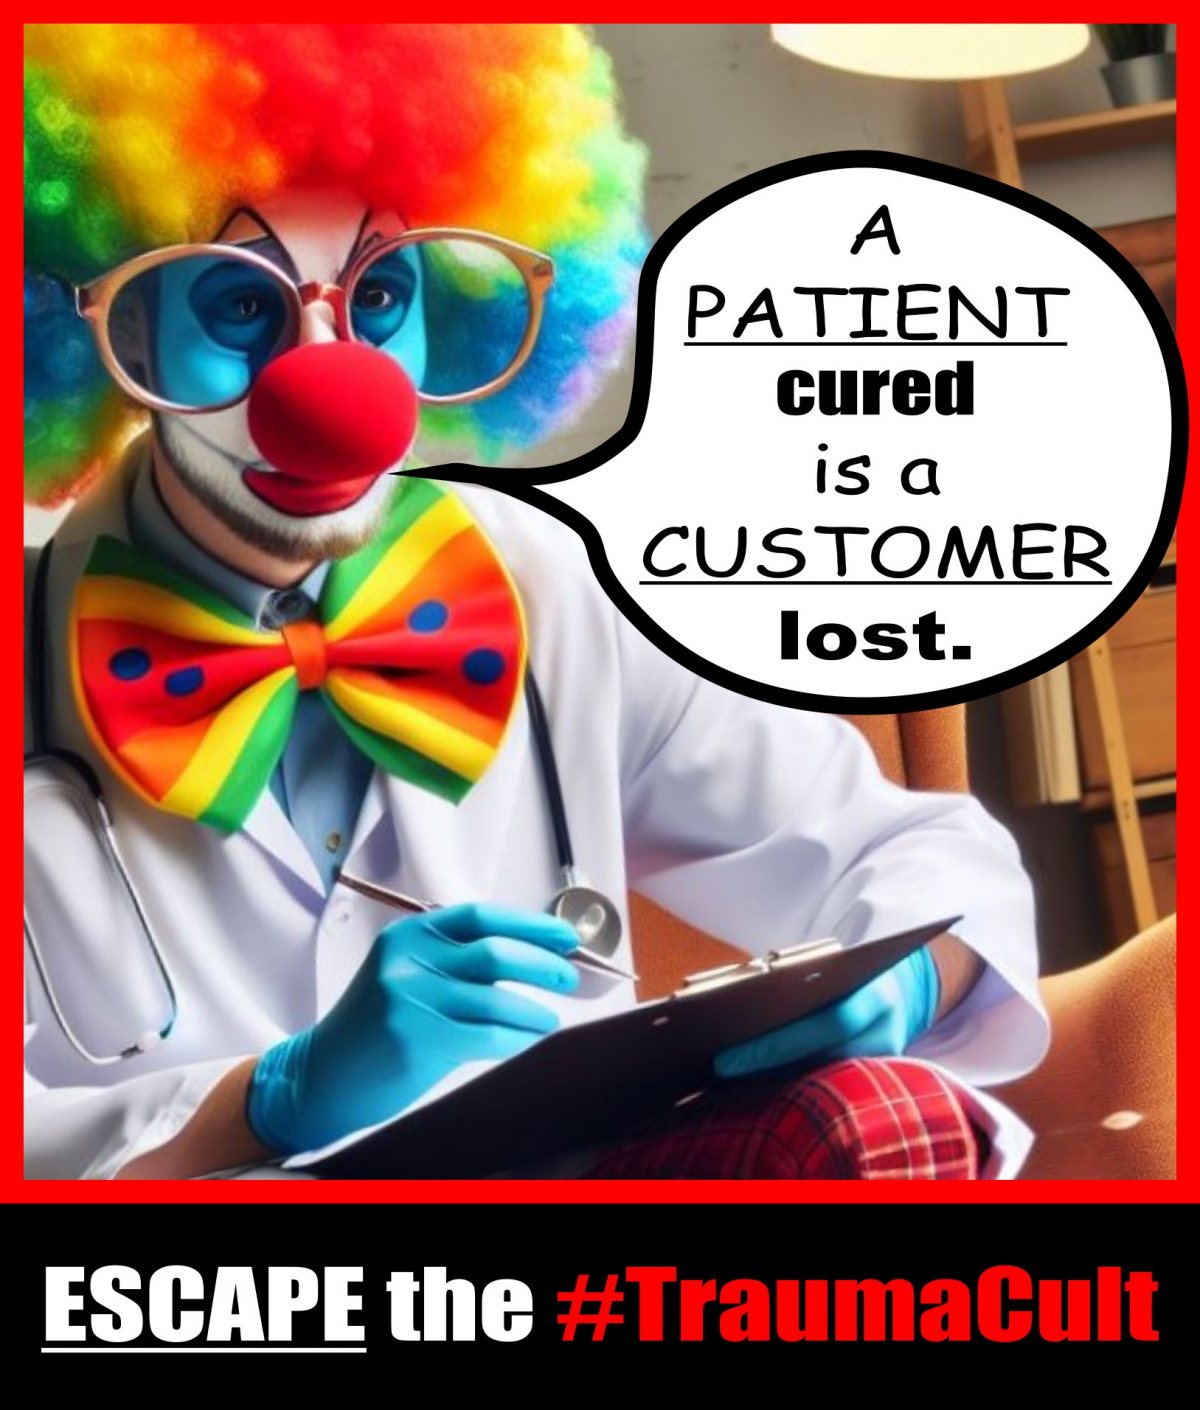 A patient cured is a patient lost - ESCAPE the trauma cult NOW!